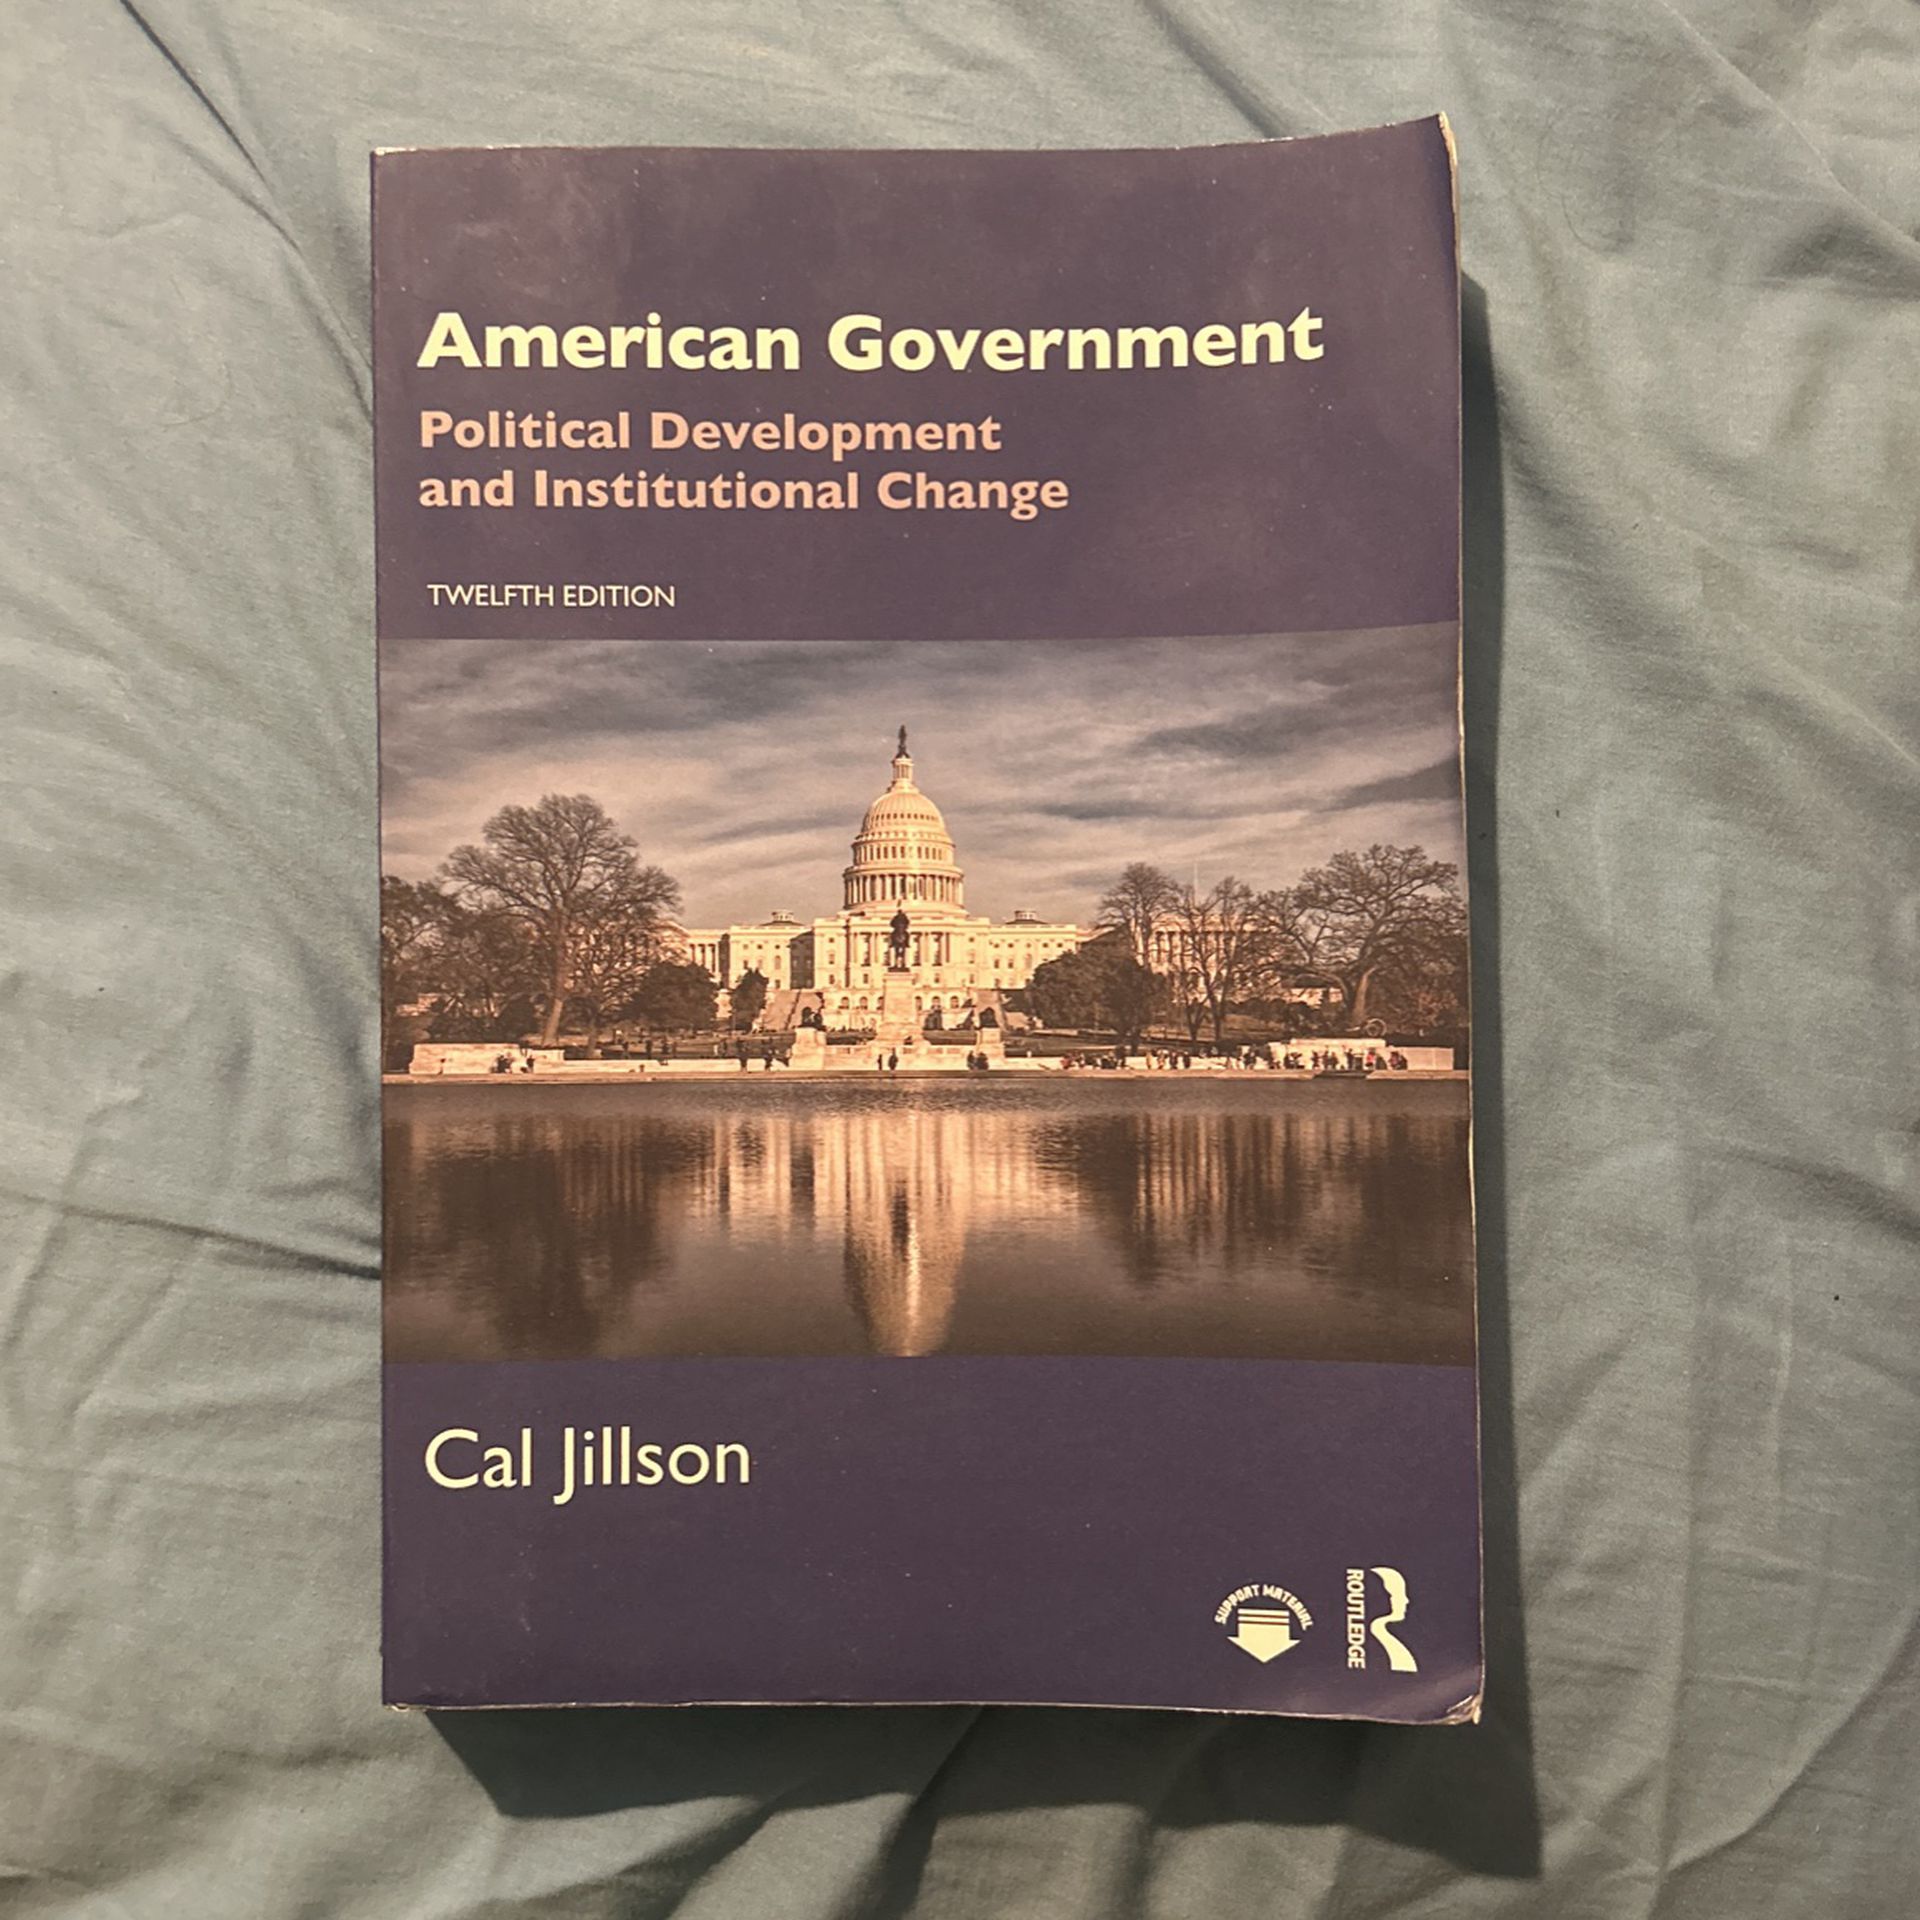 American Government- Political Development and Institutional Change